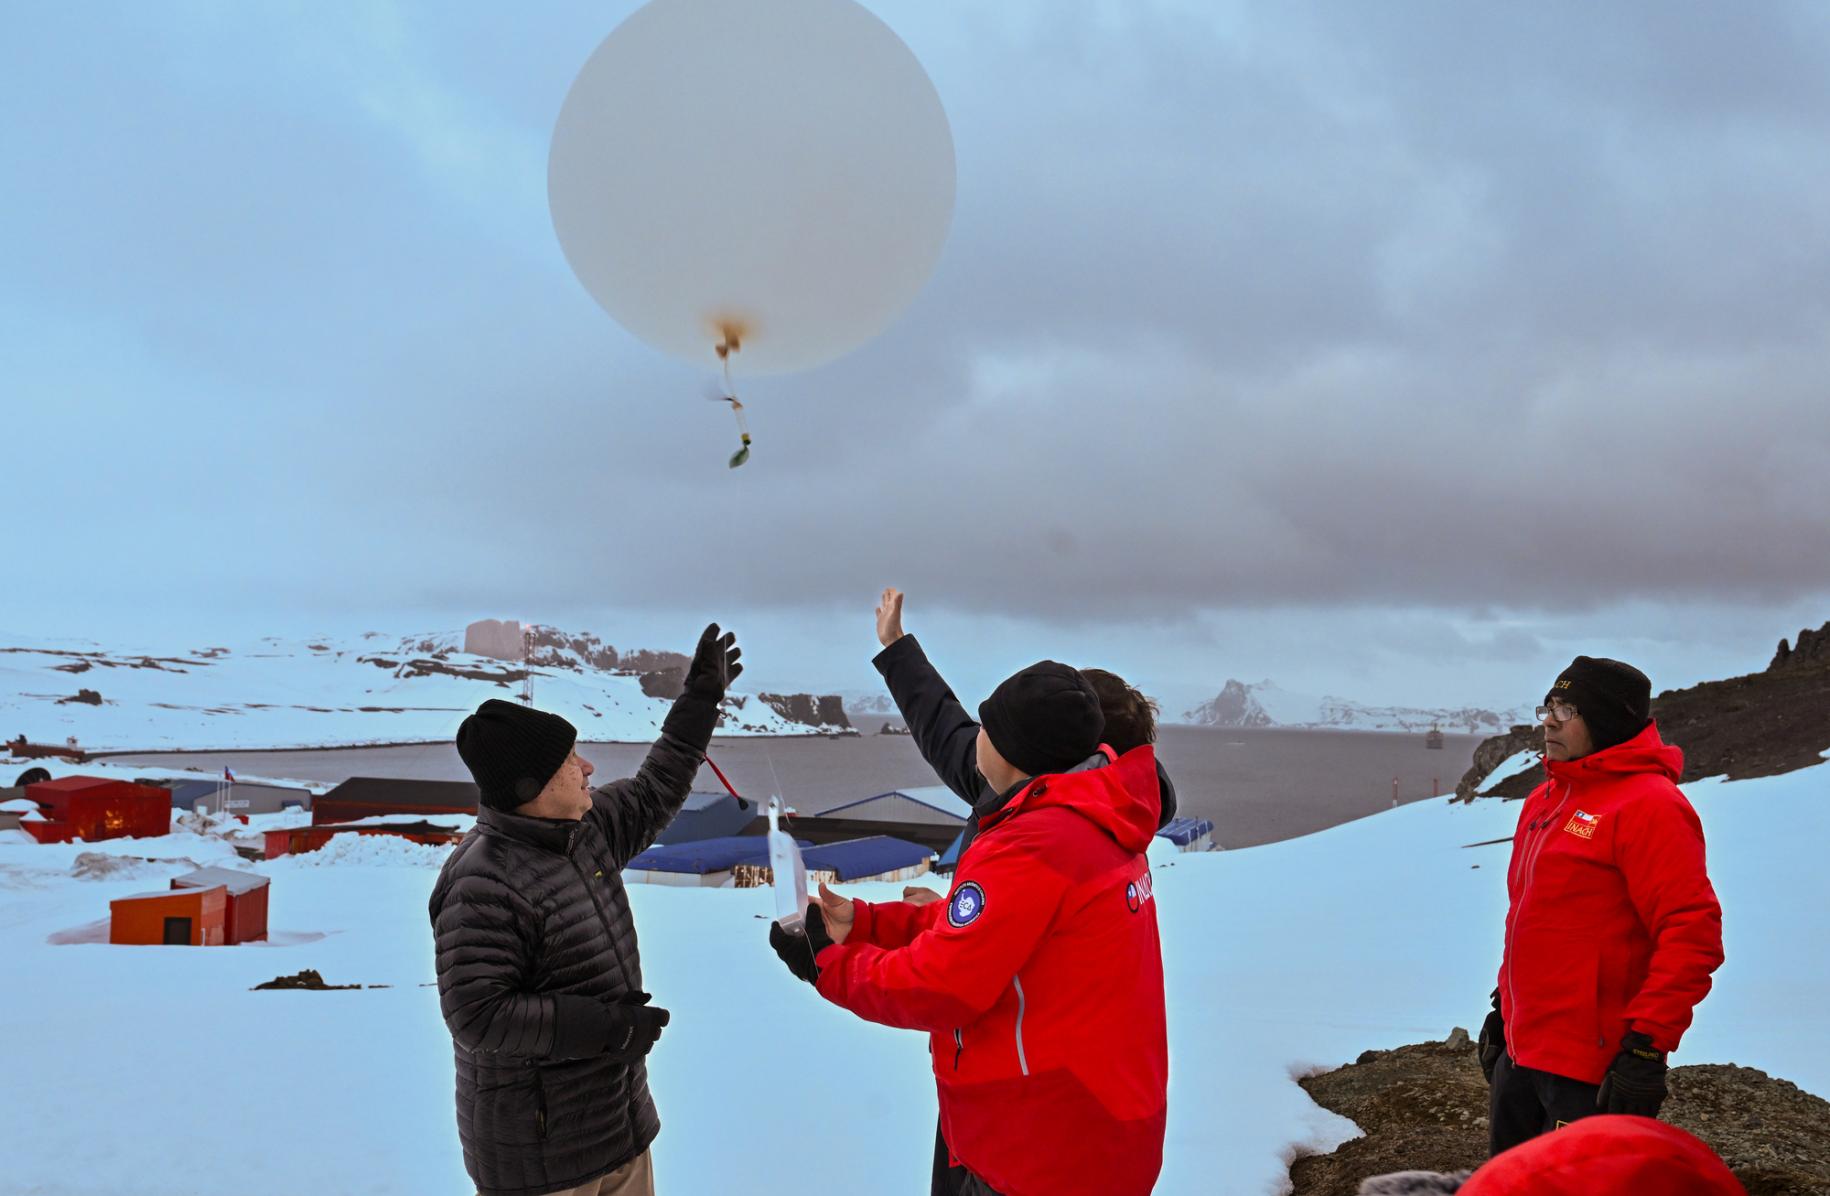 three men in waterproof clothing and hats stand on ice covered ground releasing a balloon into the air